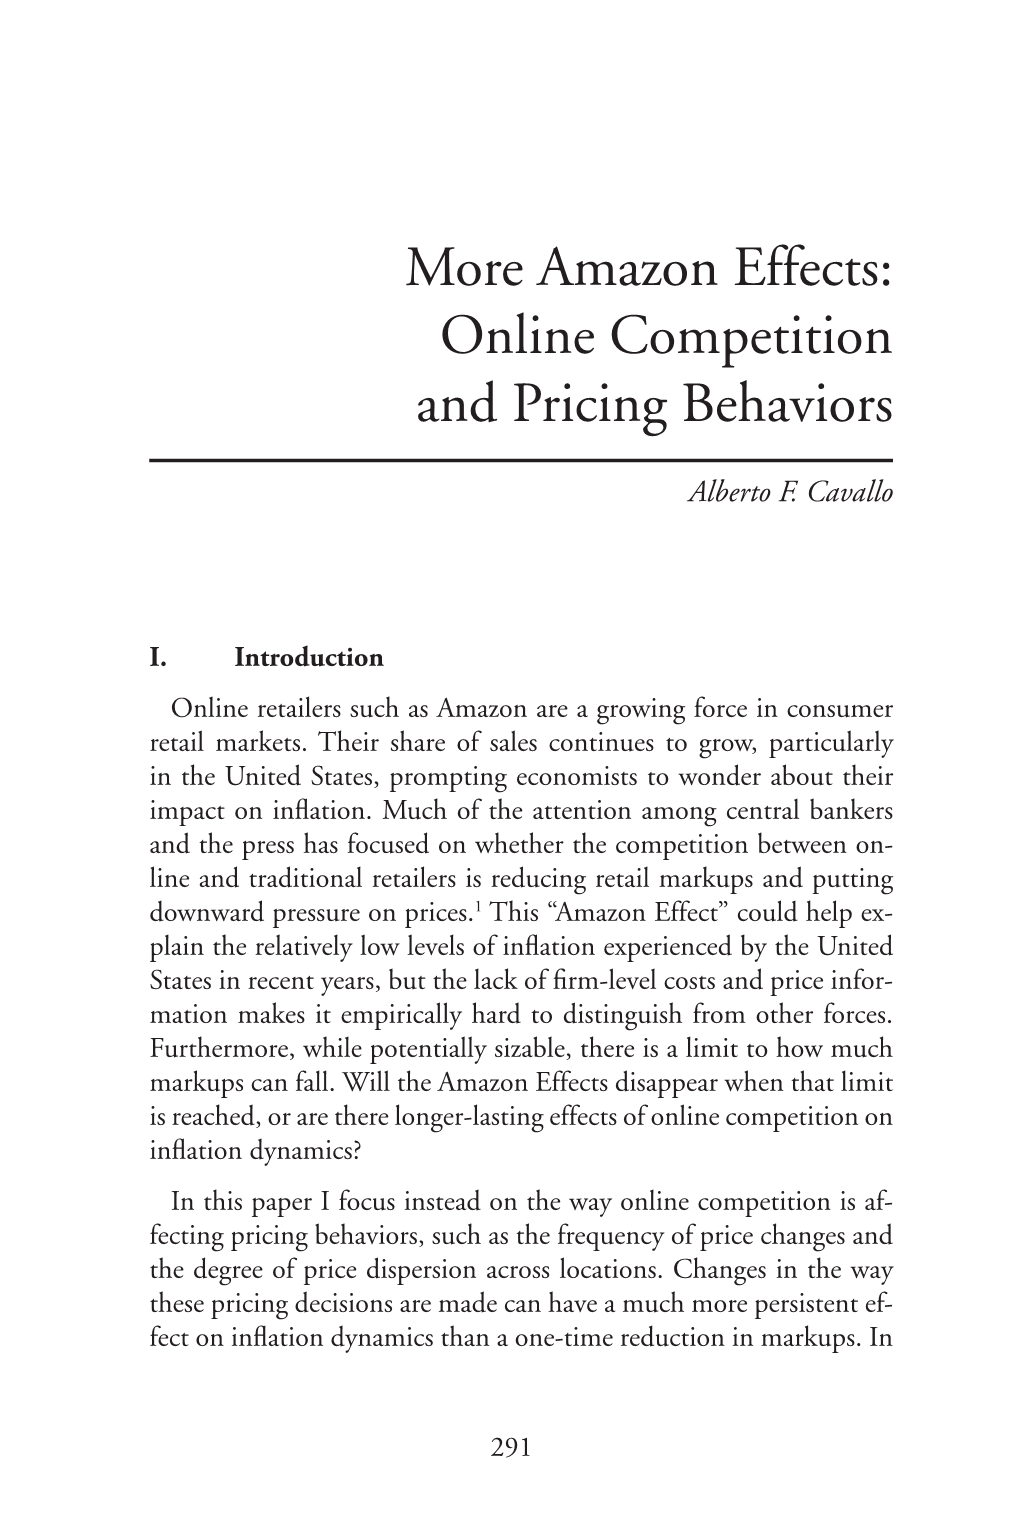 More Amazon Effects: Online Competition and Pricing Behaviors